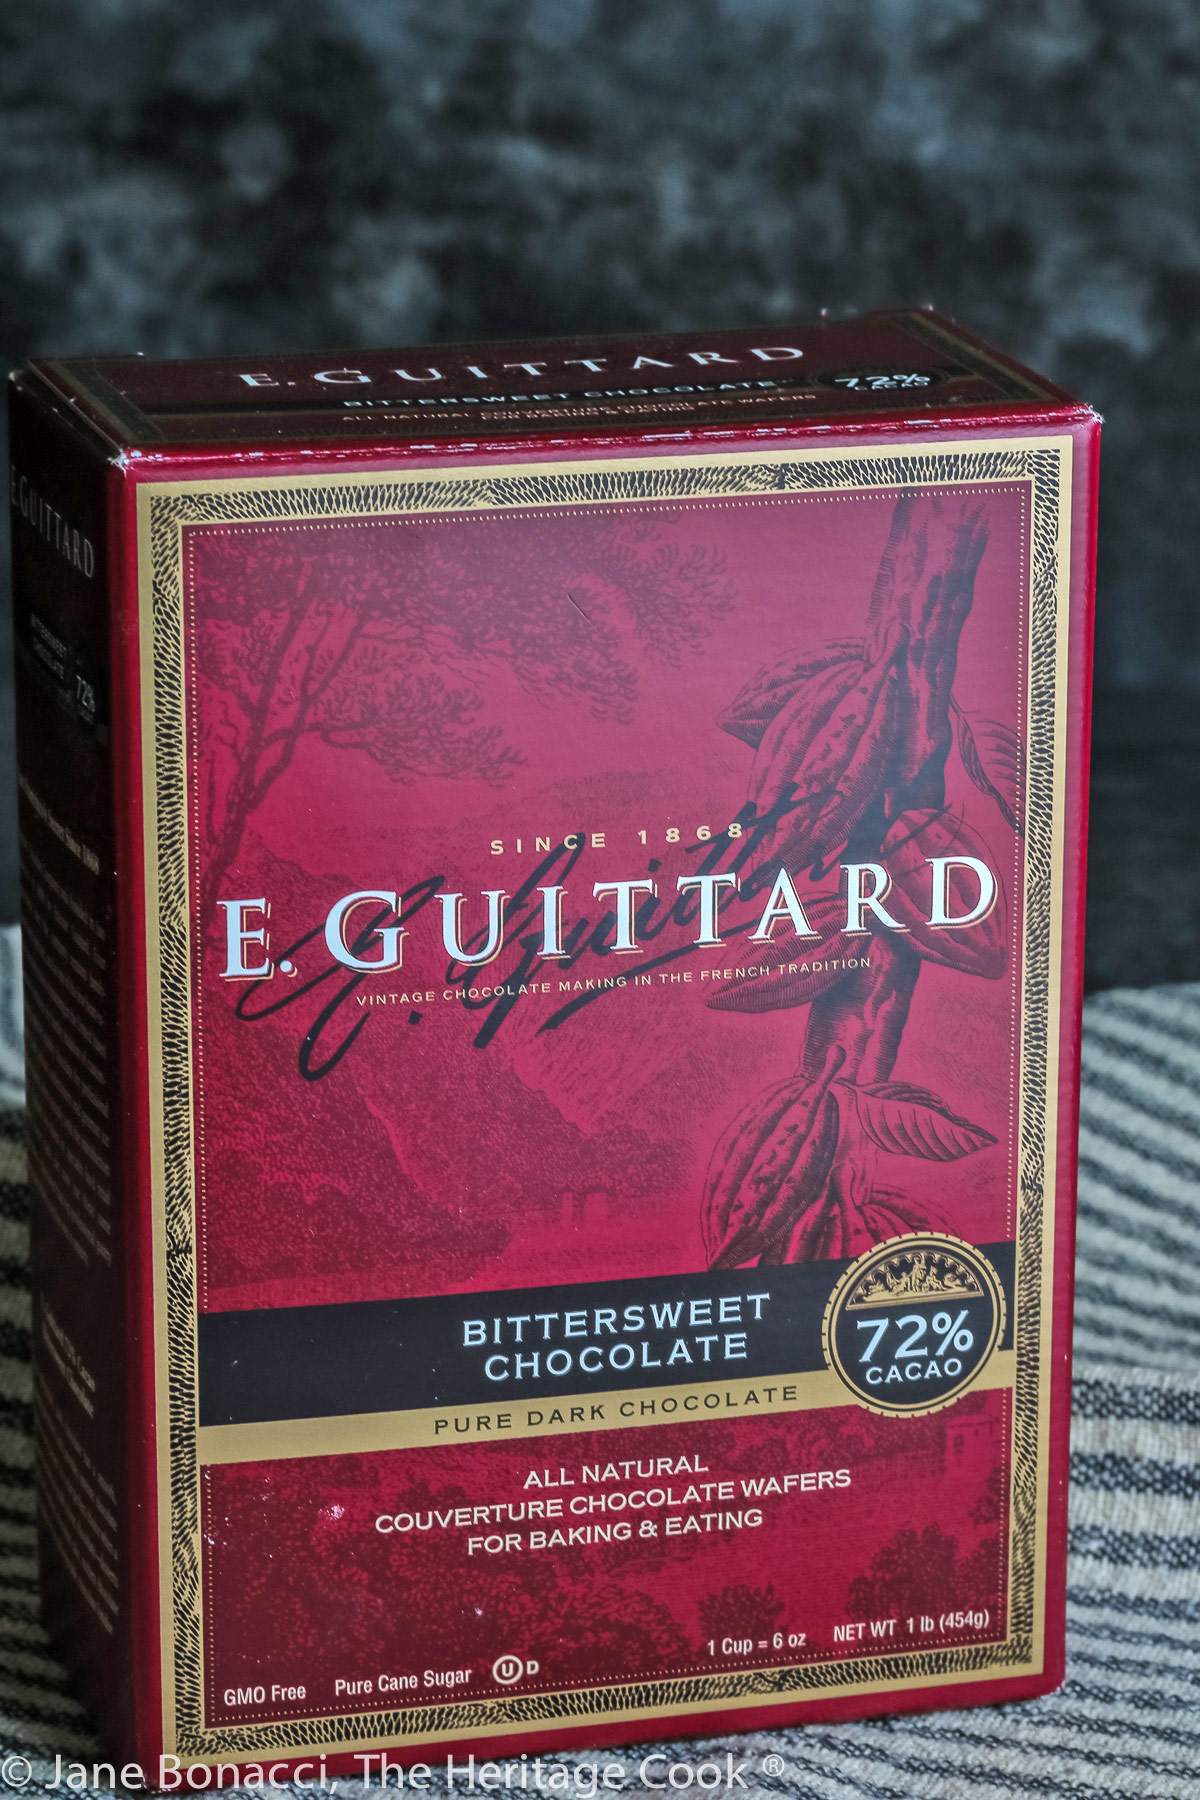 Box of Guittard chocolates I used for the ganache.